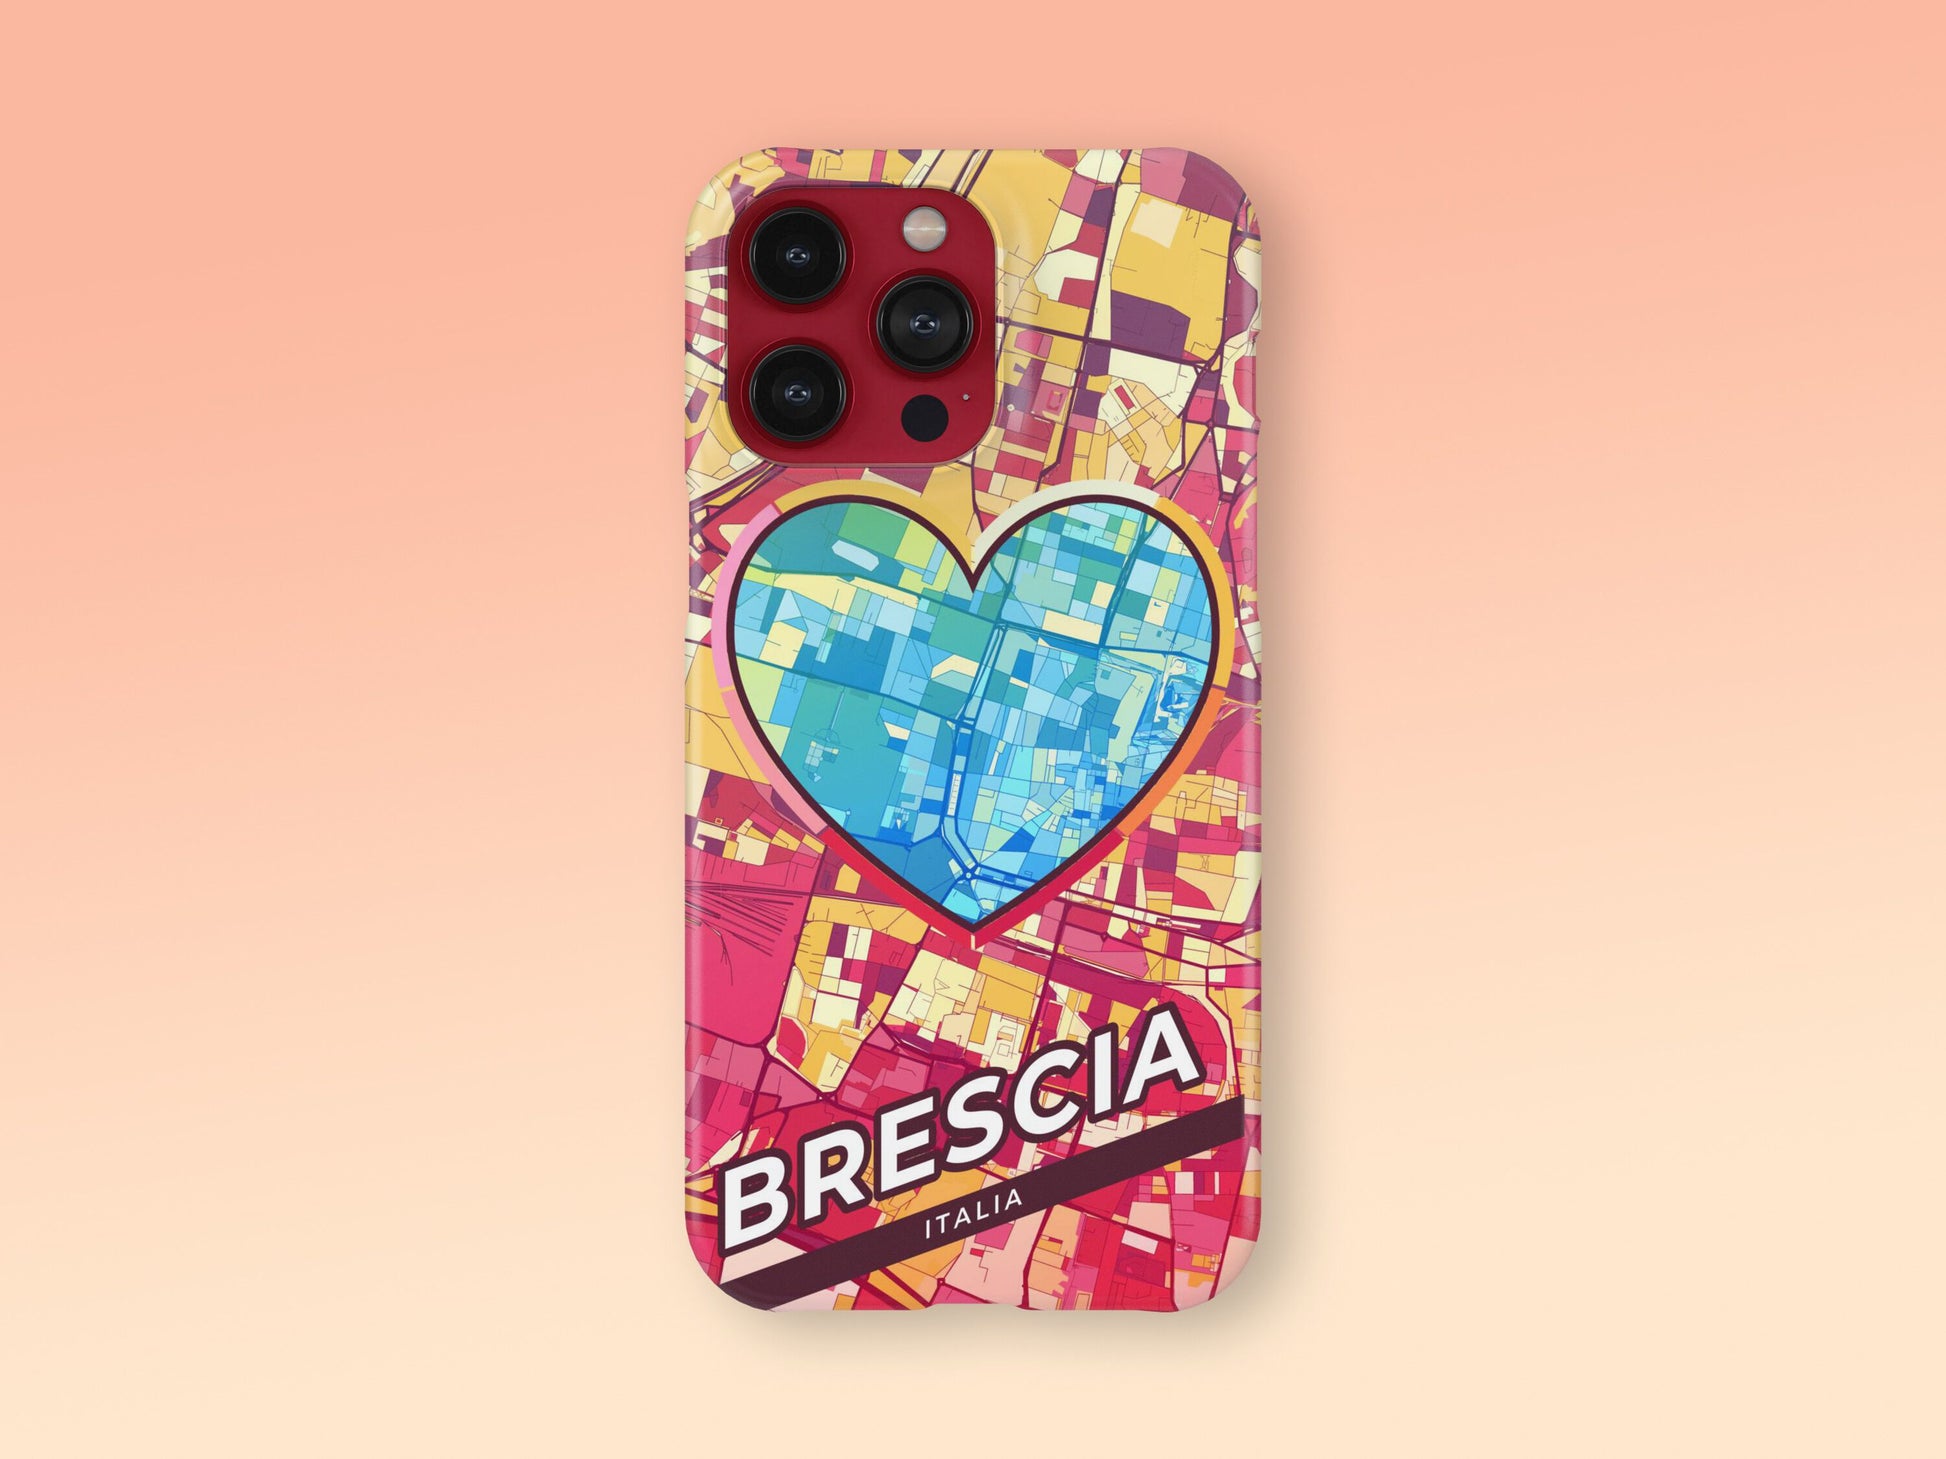 Brescia Italy slim phone case with colorful icon. Birthday, wedding or housewarming gift. Couple match cases. 2